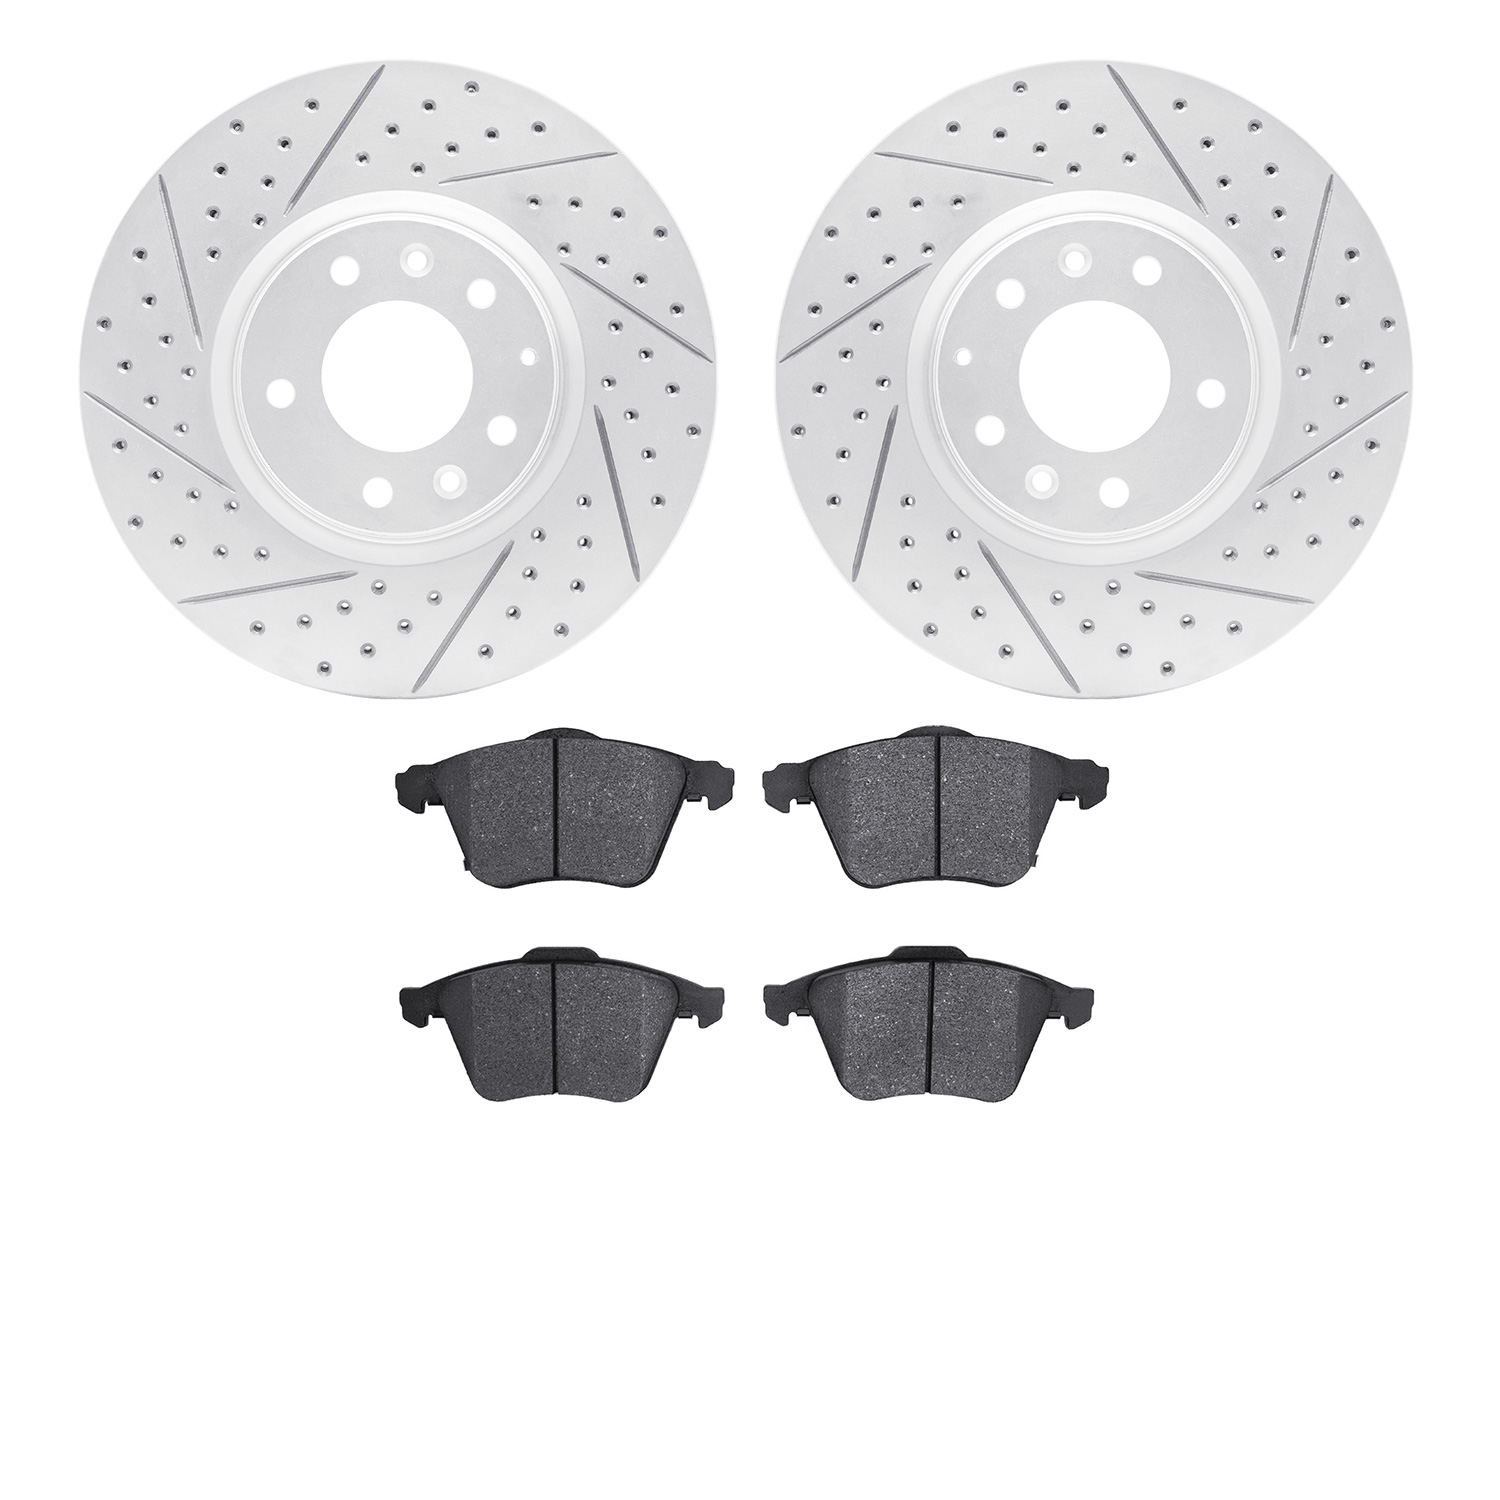 2502-80022 Geoperformance Drilled/Slotted Rotors w/5000 Advanced Brake Pads Kit, 2006-2007 Ford/Lincoln/Mercury/Mazda, Position: